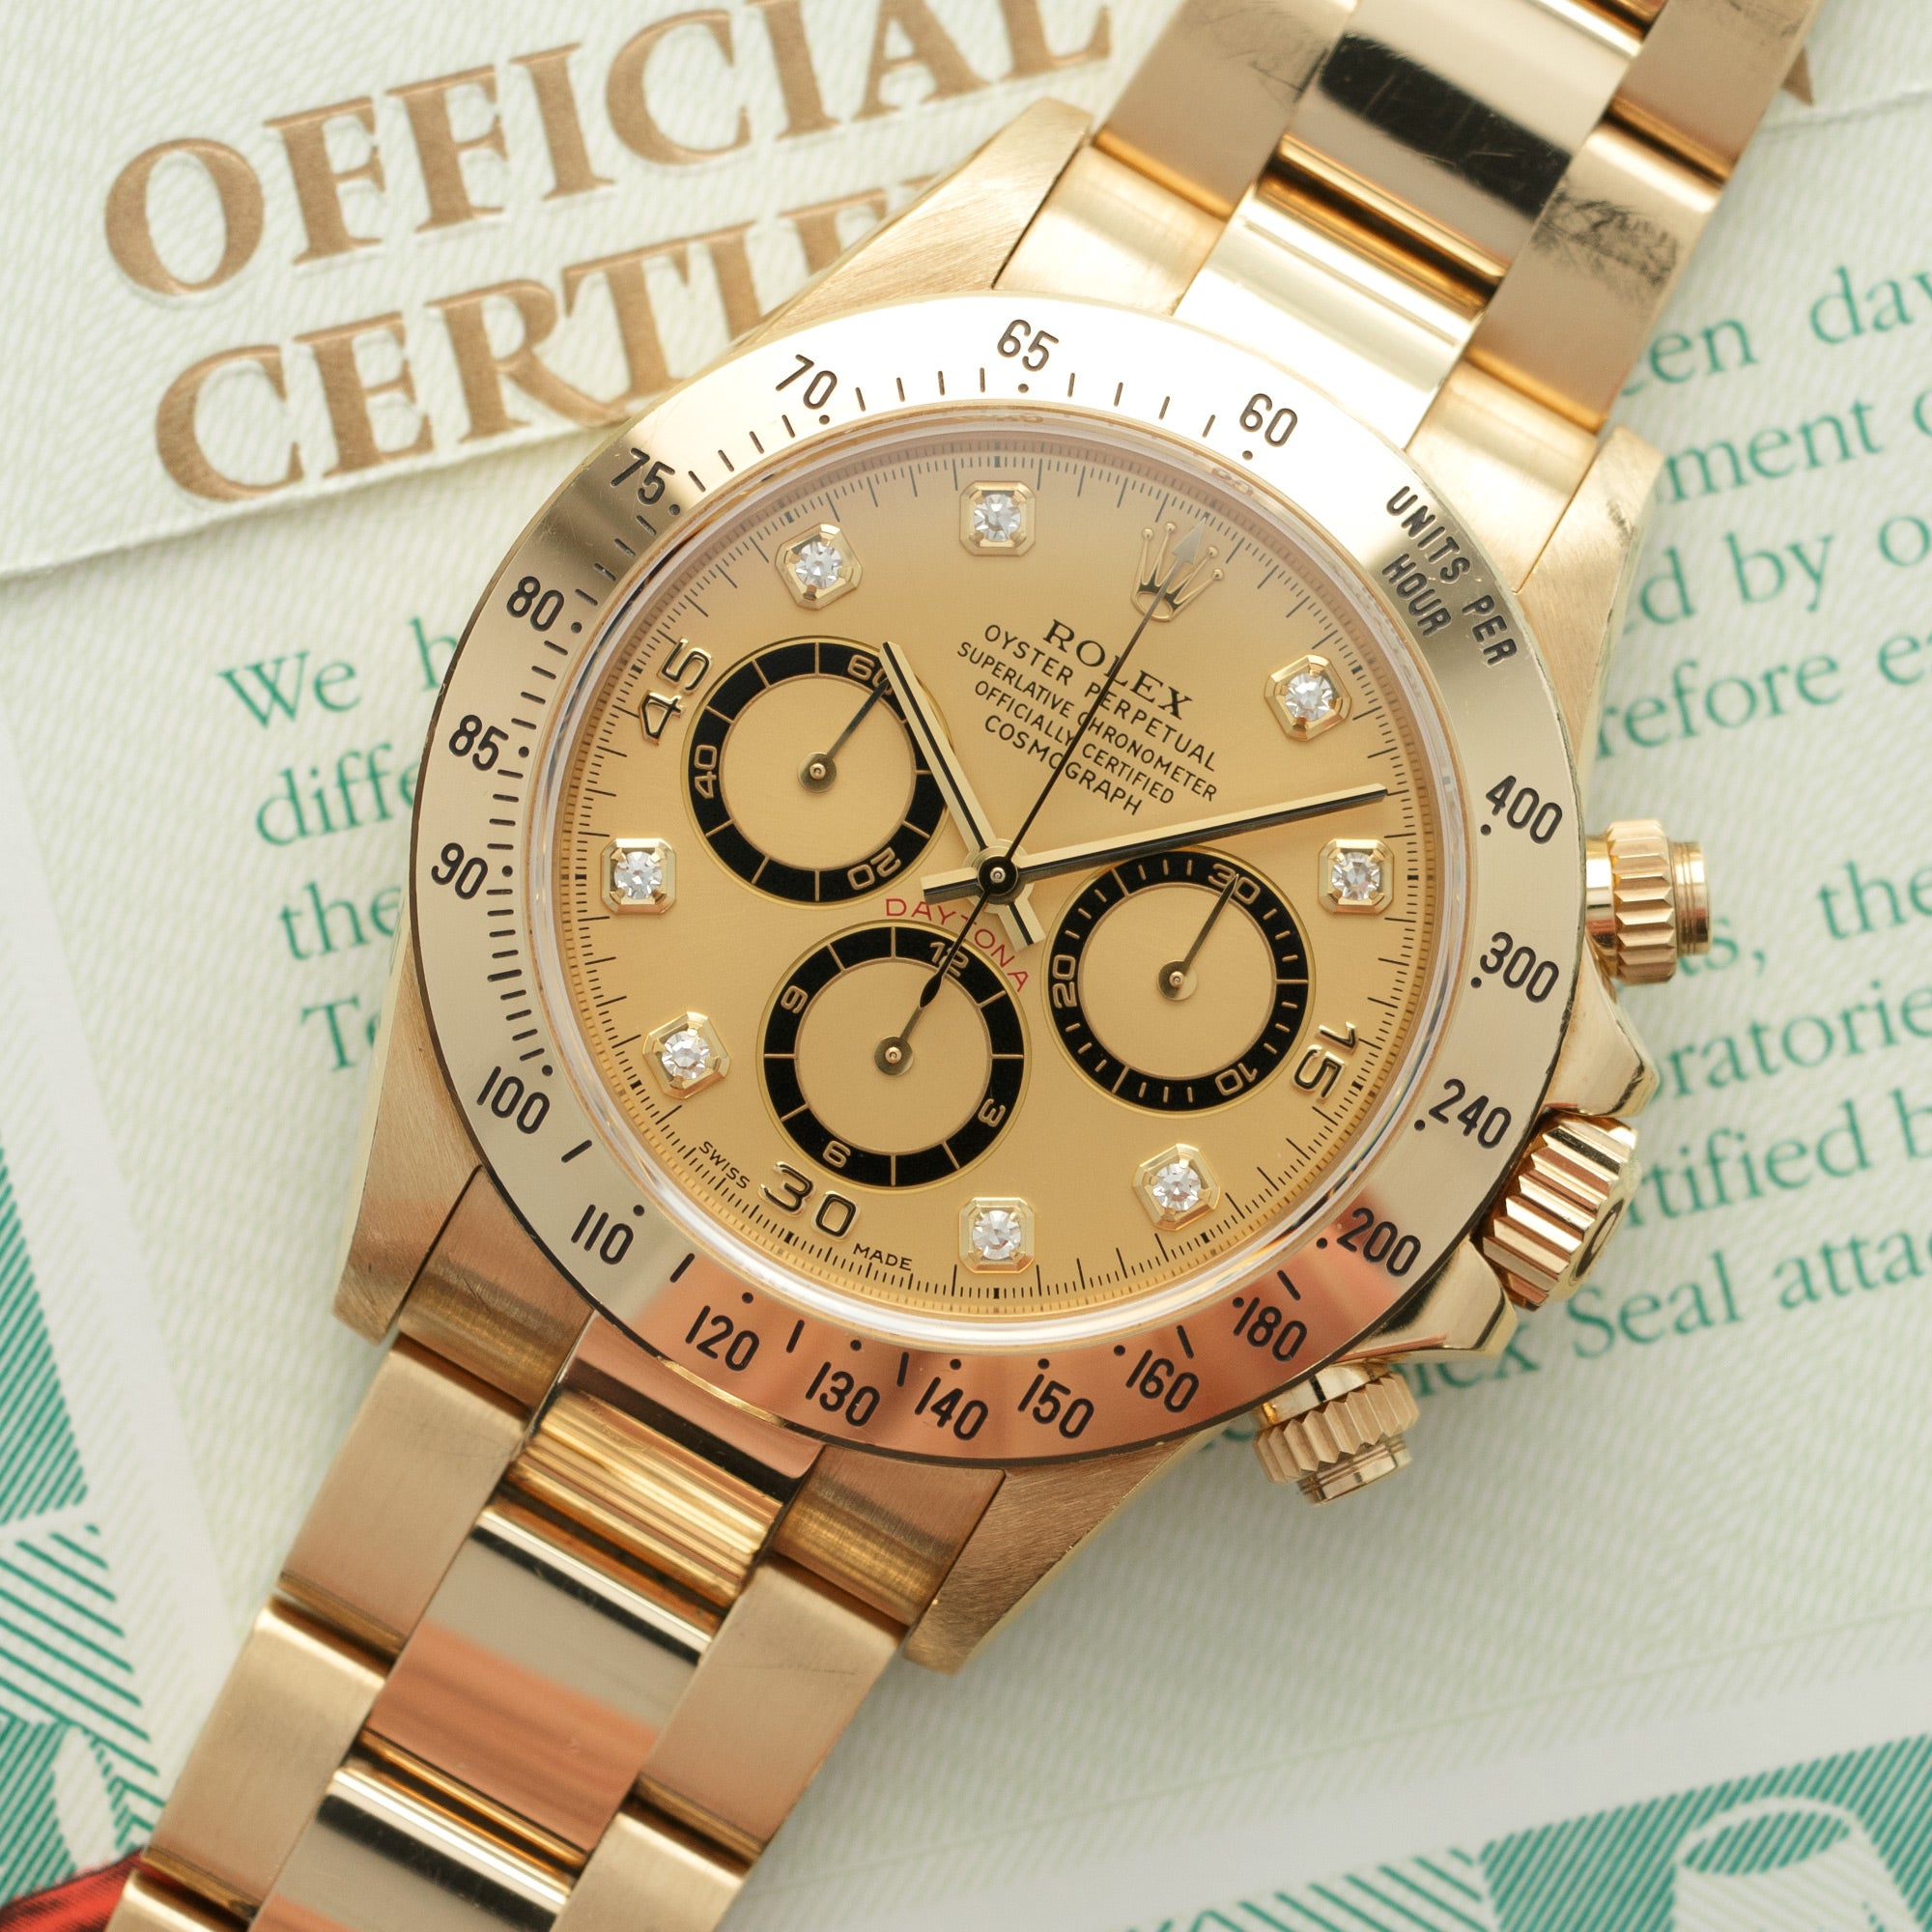 Rolex - Rolex Yellow Gold Cosmograph Daytona Zenith Watch Ref. 16528 with Original Box and Papers - The Keystone Watches